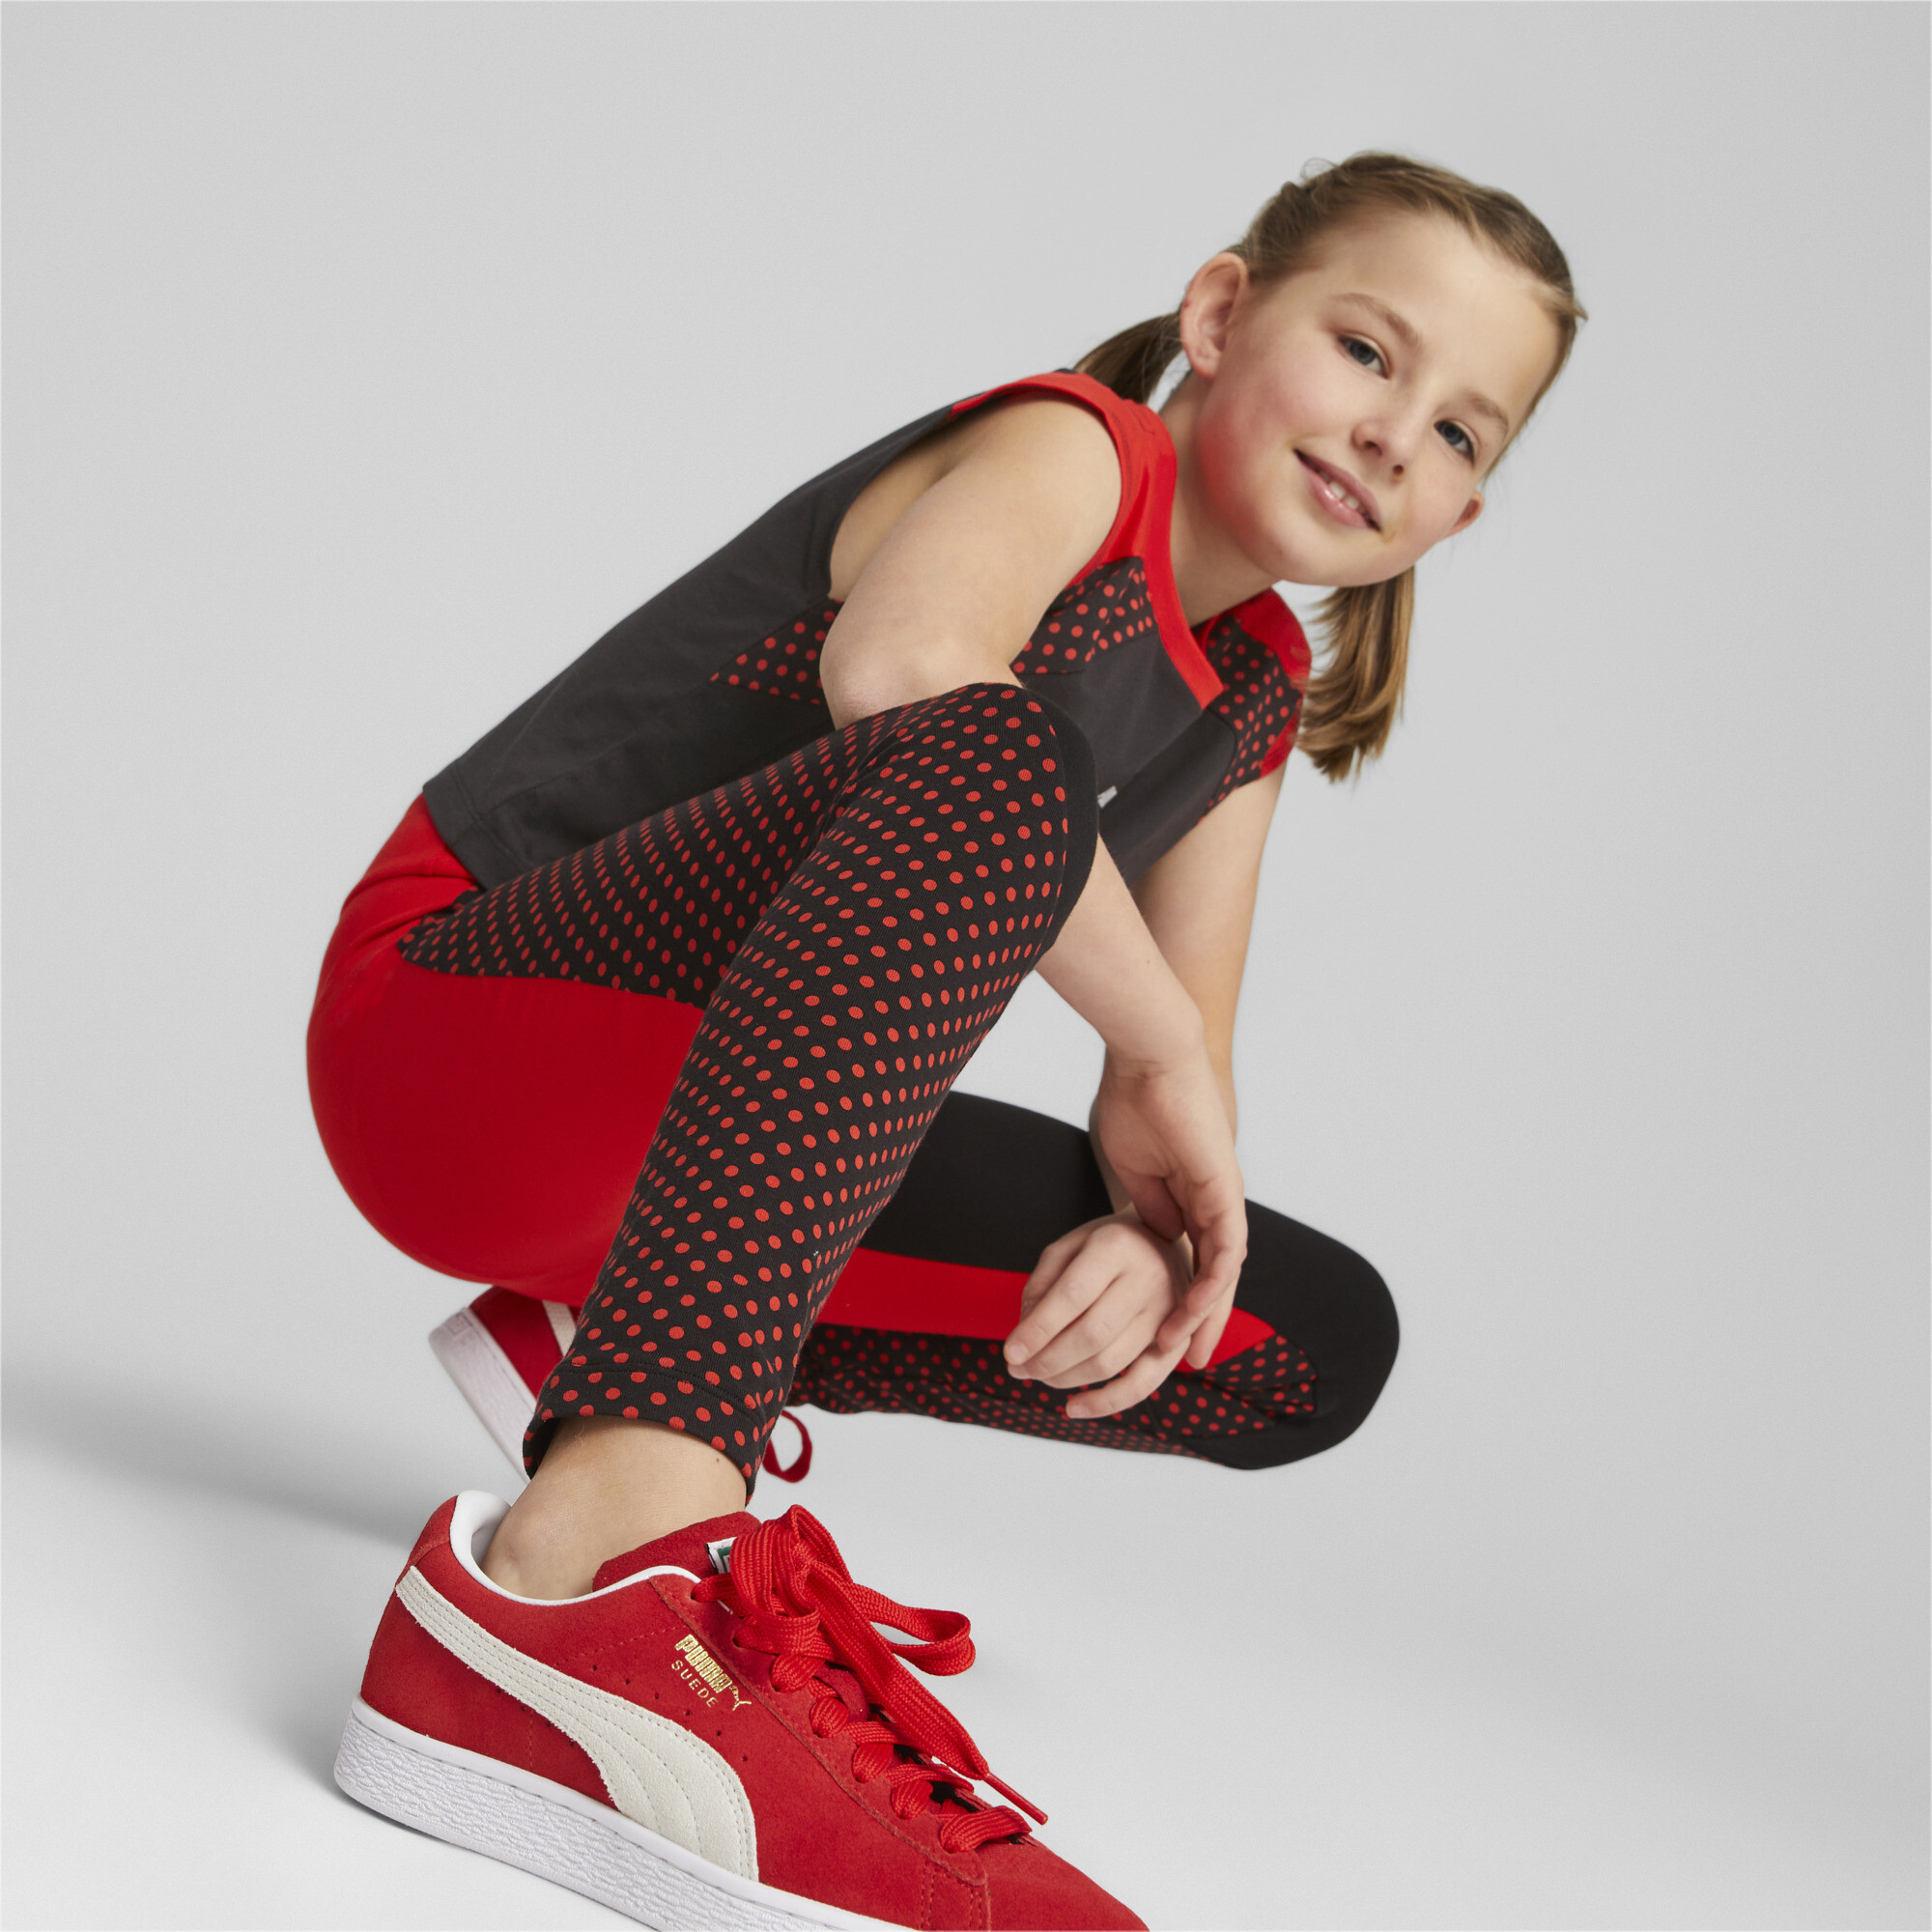 PUMA X MIRACULOUS Leggings In Black, Size 9-10 Youth